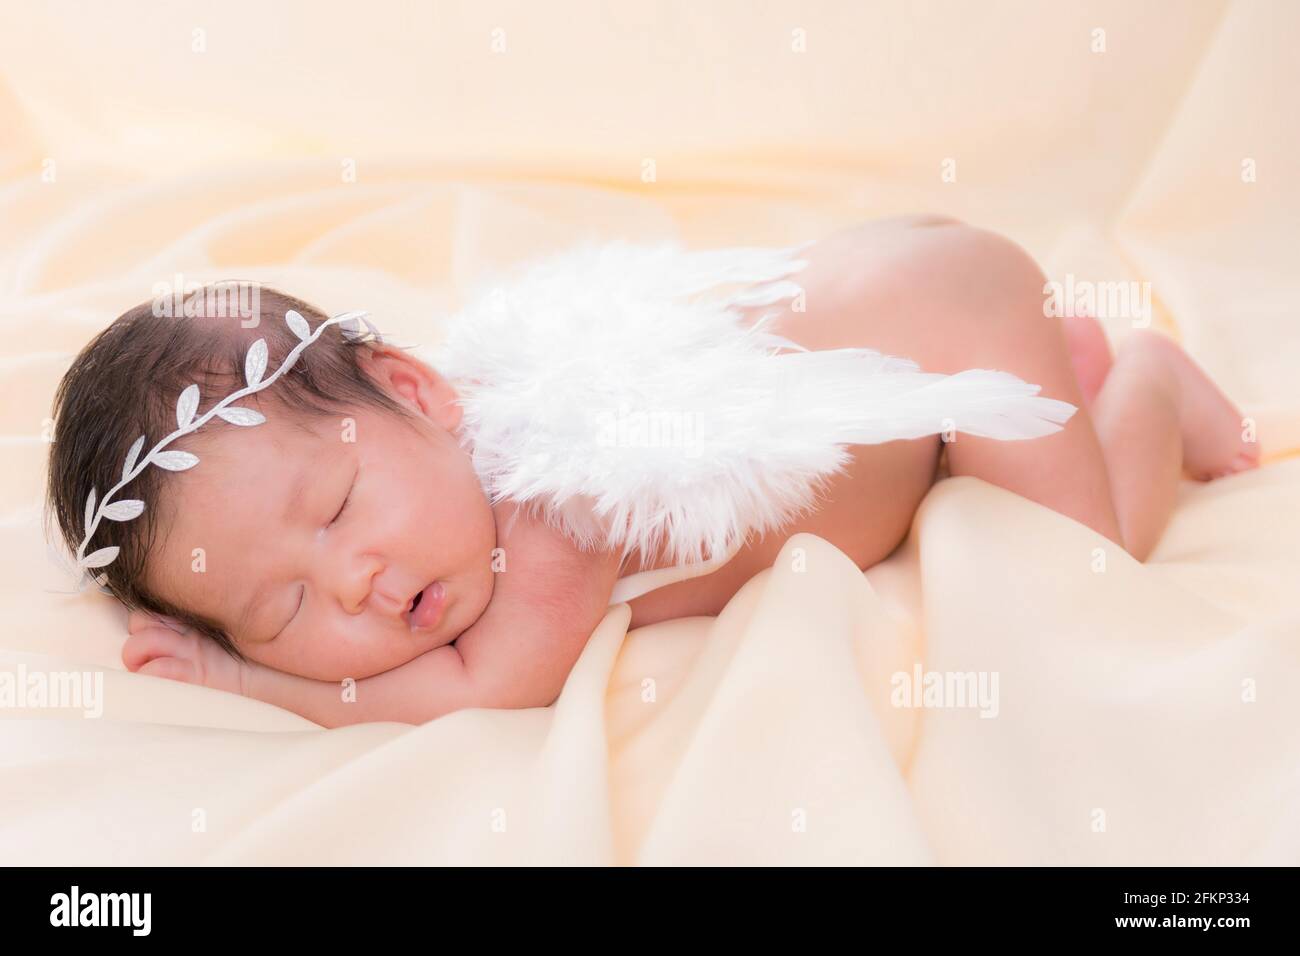 Portrait of a one month old sleeping, newborn baby girl. She is wearing a white crown headband, angel wings and sleeping on a cream blanket. Concept p Stock Photo